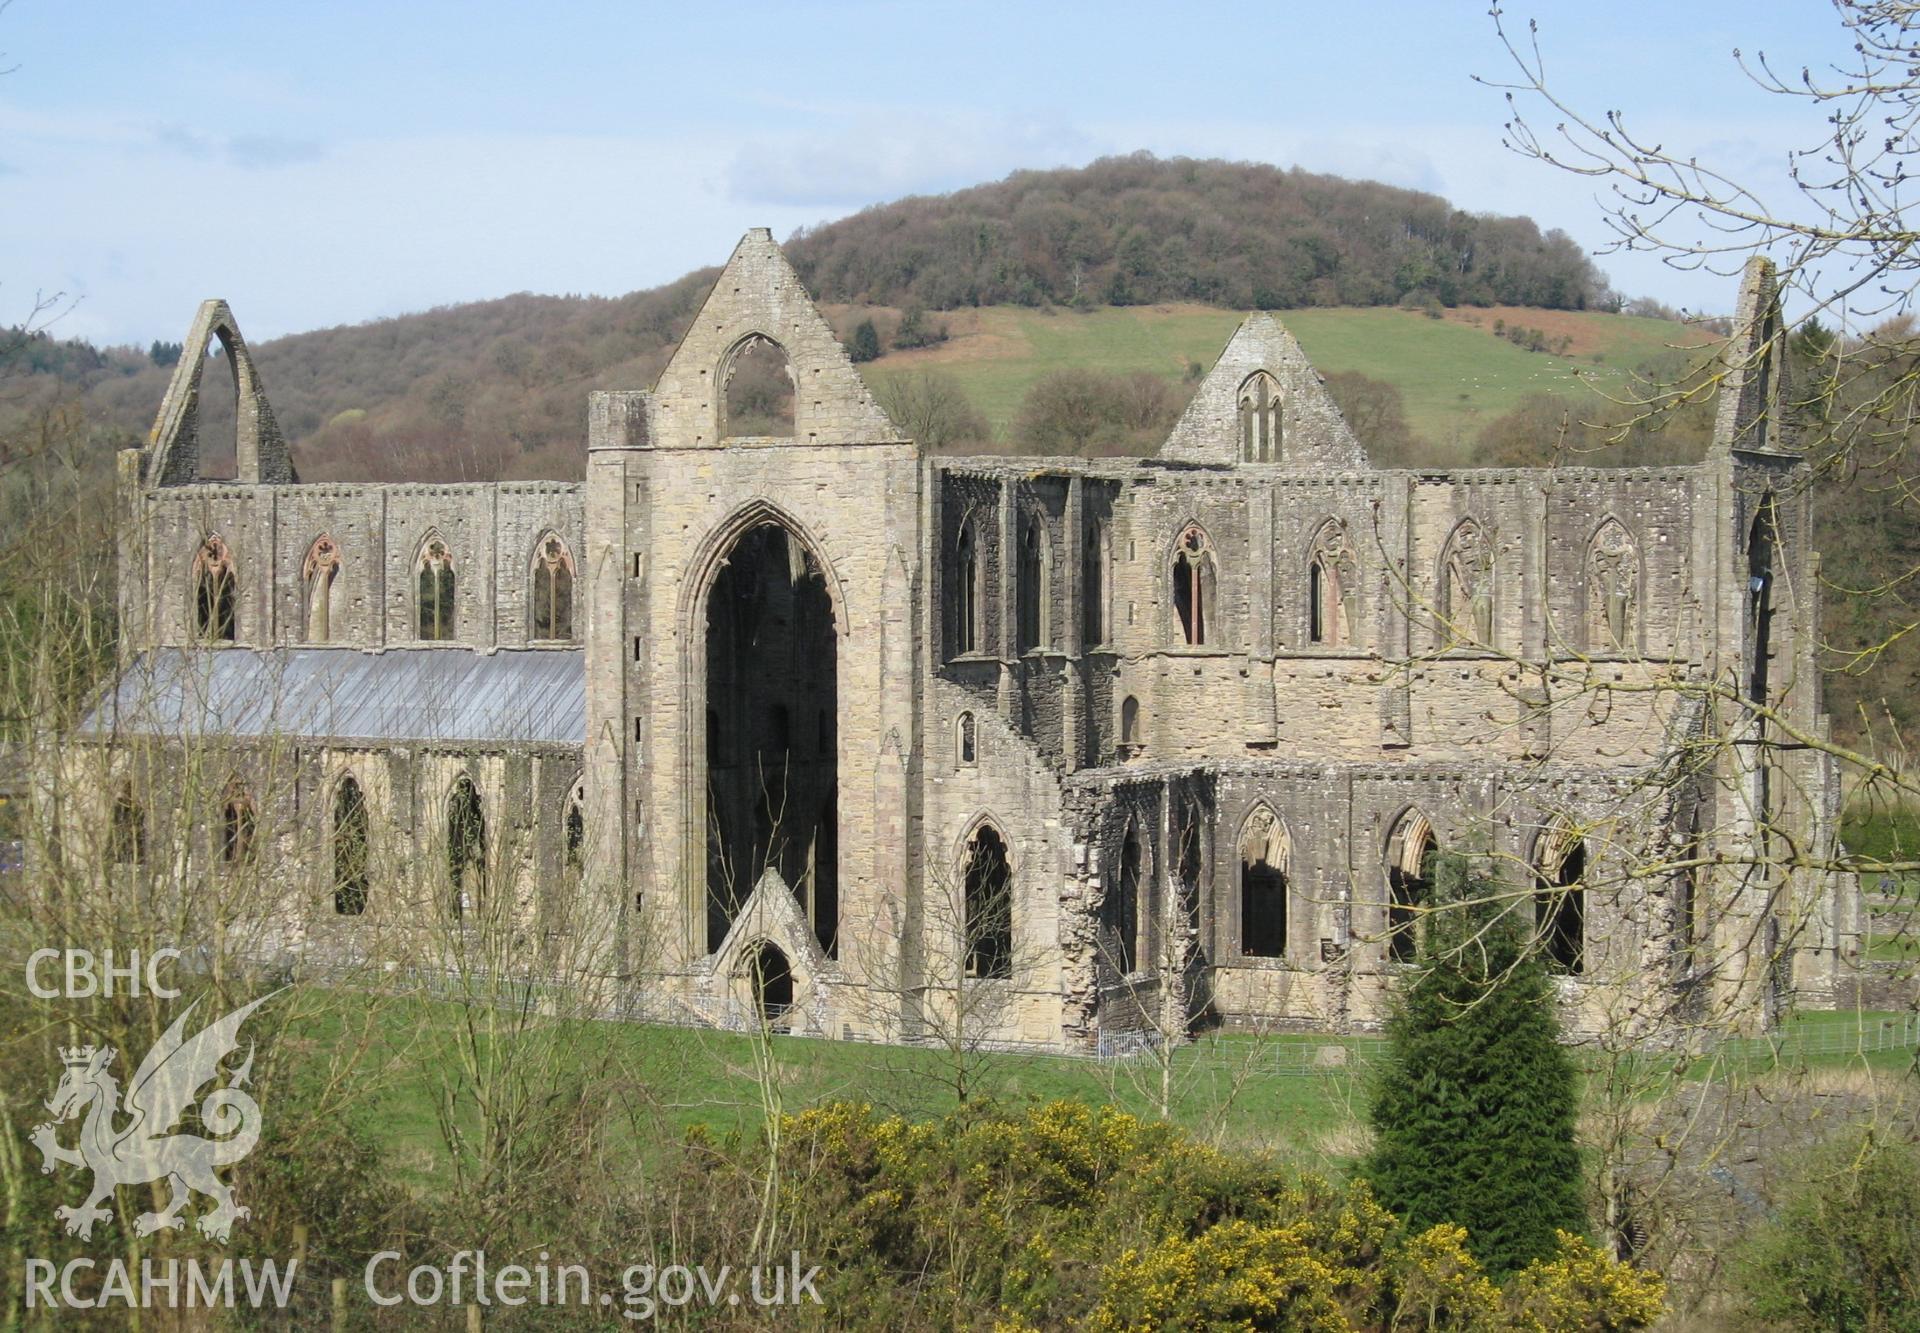 Colour photo showing Tintern Abbey,  produced by Paul R. Davis, 4th January 2007.